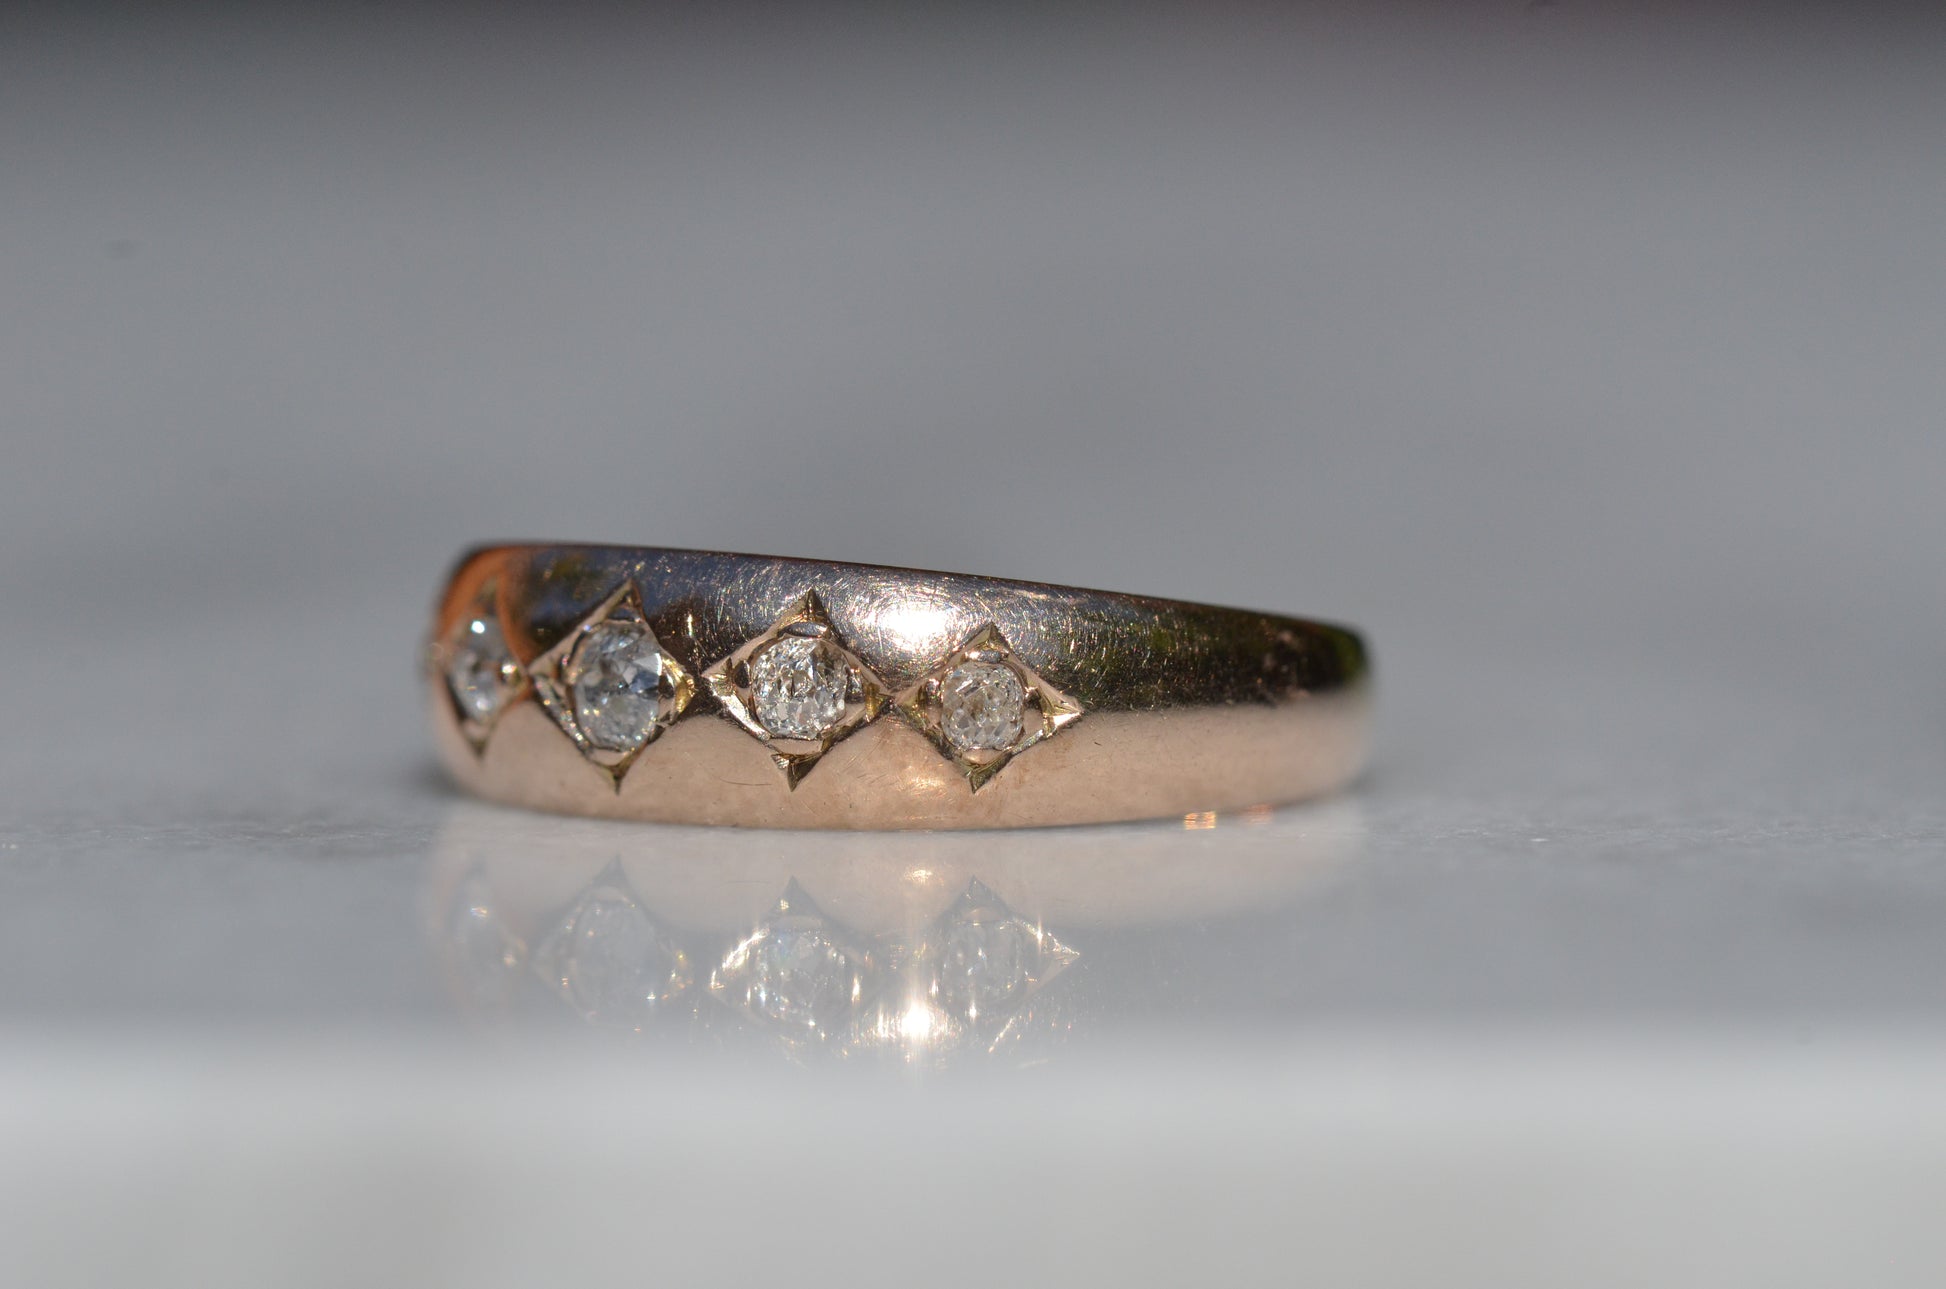 A tightly-cropped macro shot of the Victorian ring, showing the hand-cut diamond-shaped frames that hold each cushion-shaped stone. The old mine cut diamonds have internal fractures and inclusions but still sparkle in the direct sun, and the gold is weathered from a century of wear. The ring is facing slightly to the left, to better see the detail of the tapering side stones.